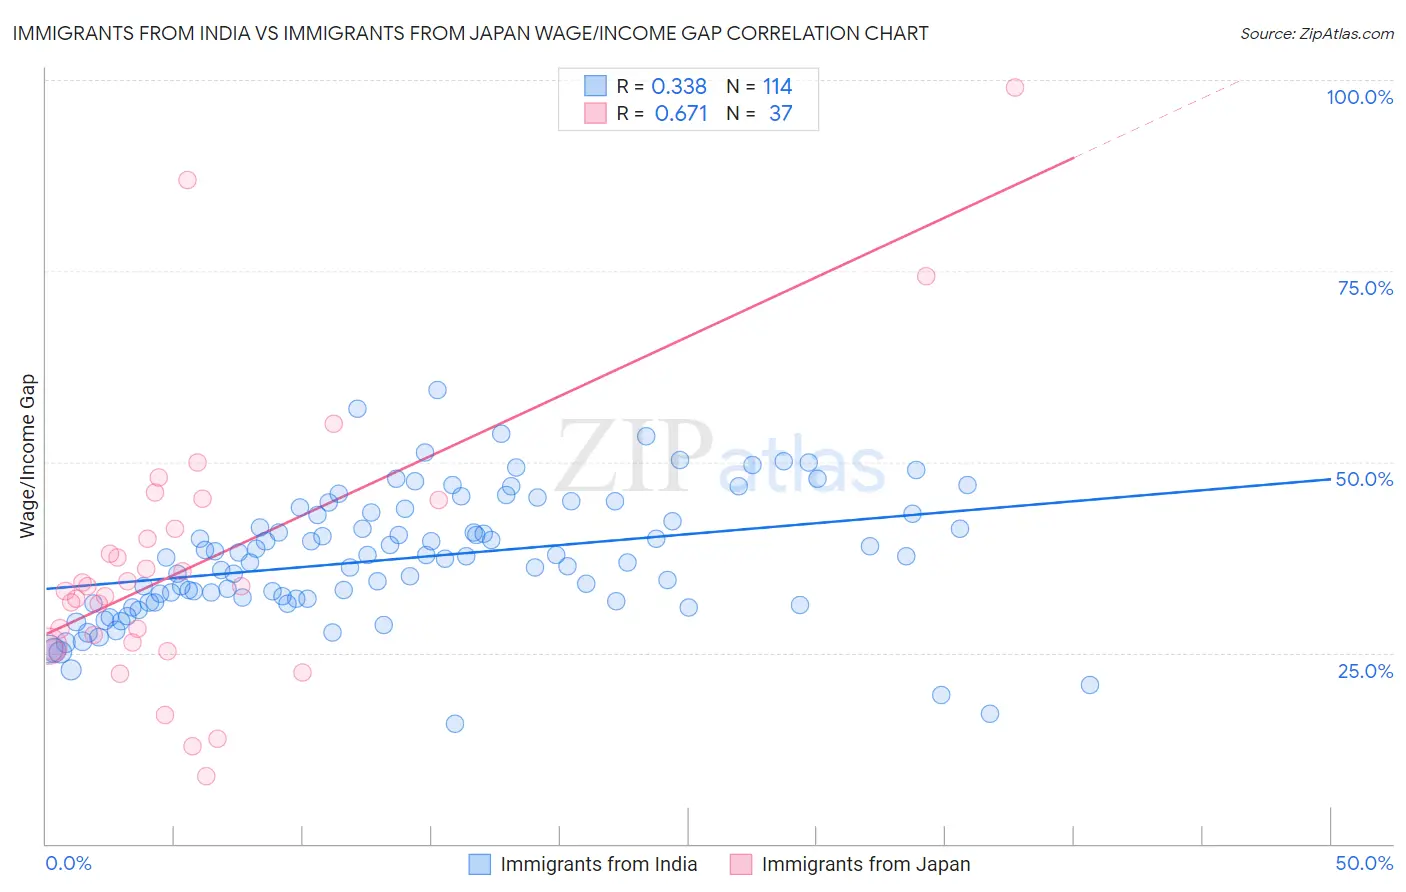 Immigrants from India vs Immigrants from Japan Wage/Income Gap